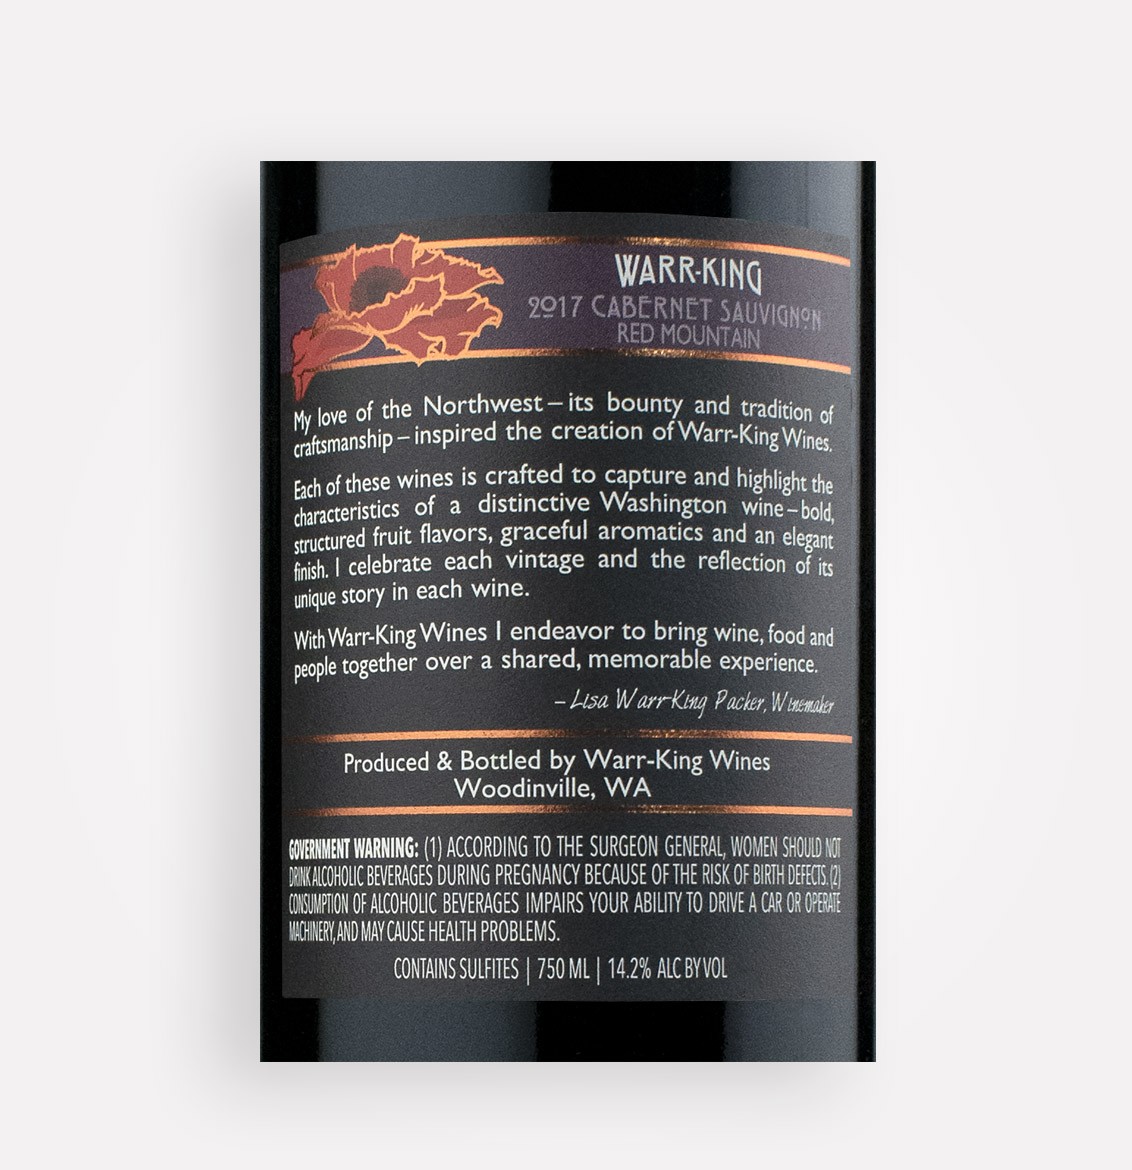 Back label close-up of Warr-King 2017 Cabernet Sauvignon wine from Washington's Red Mountain